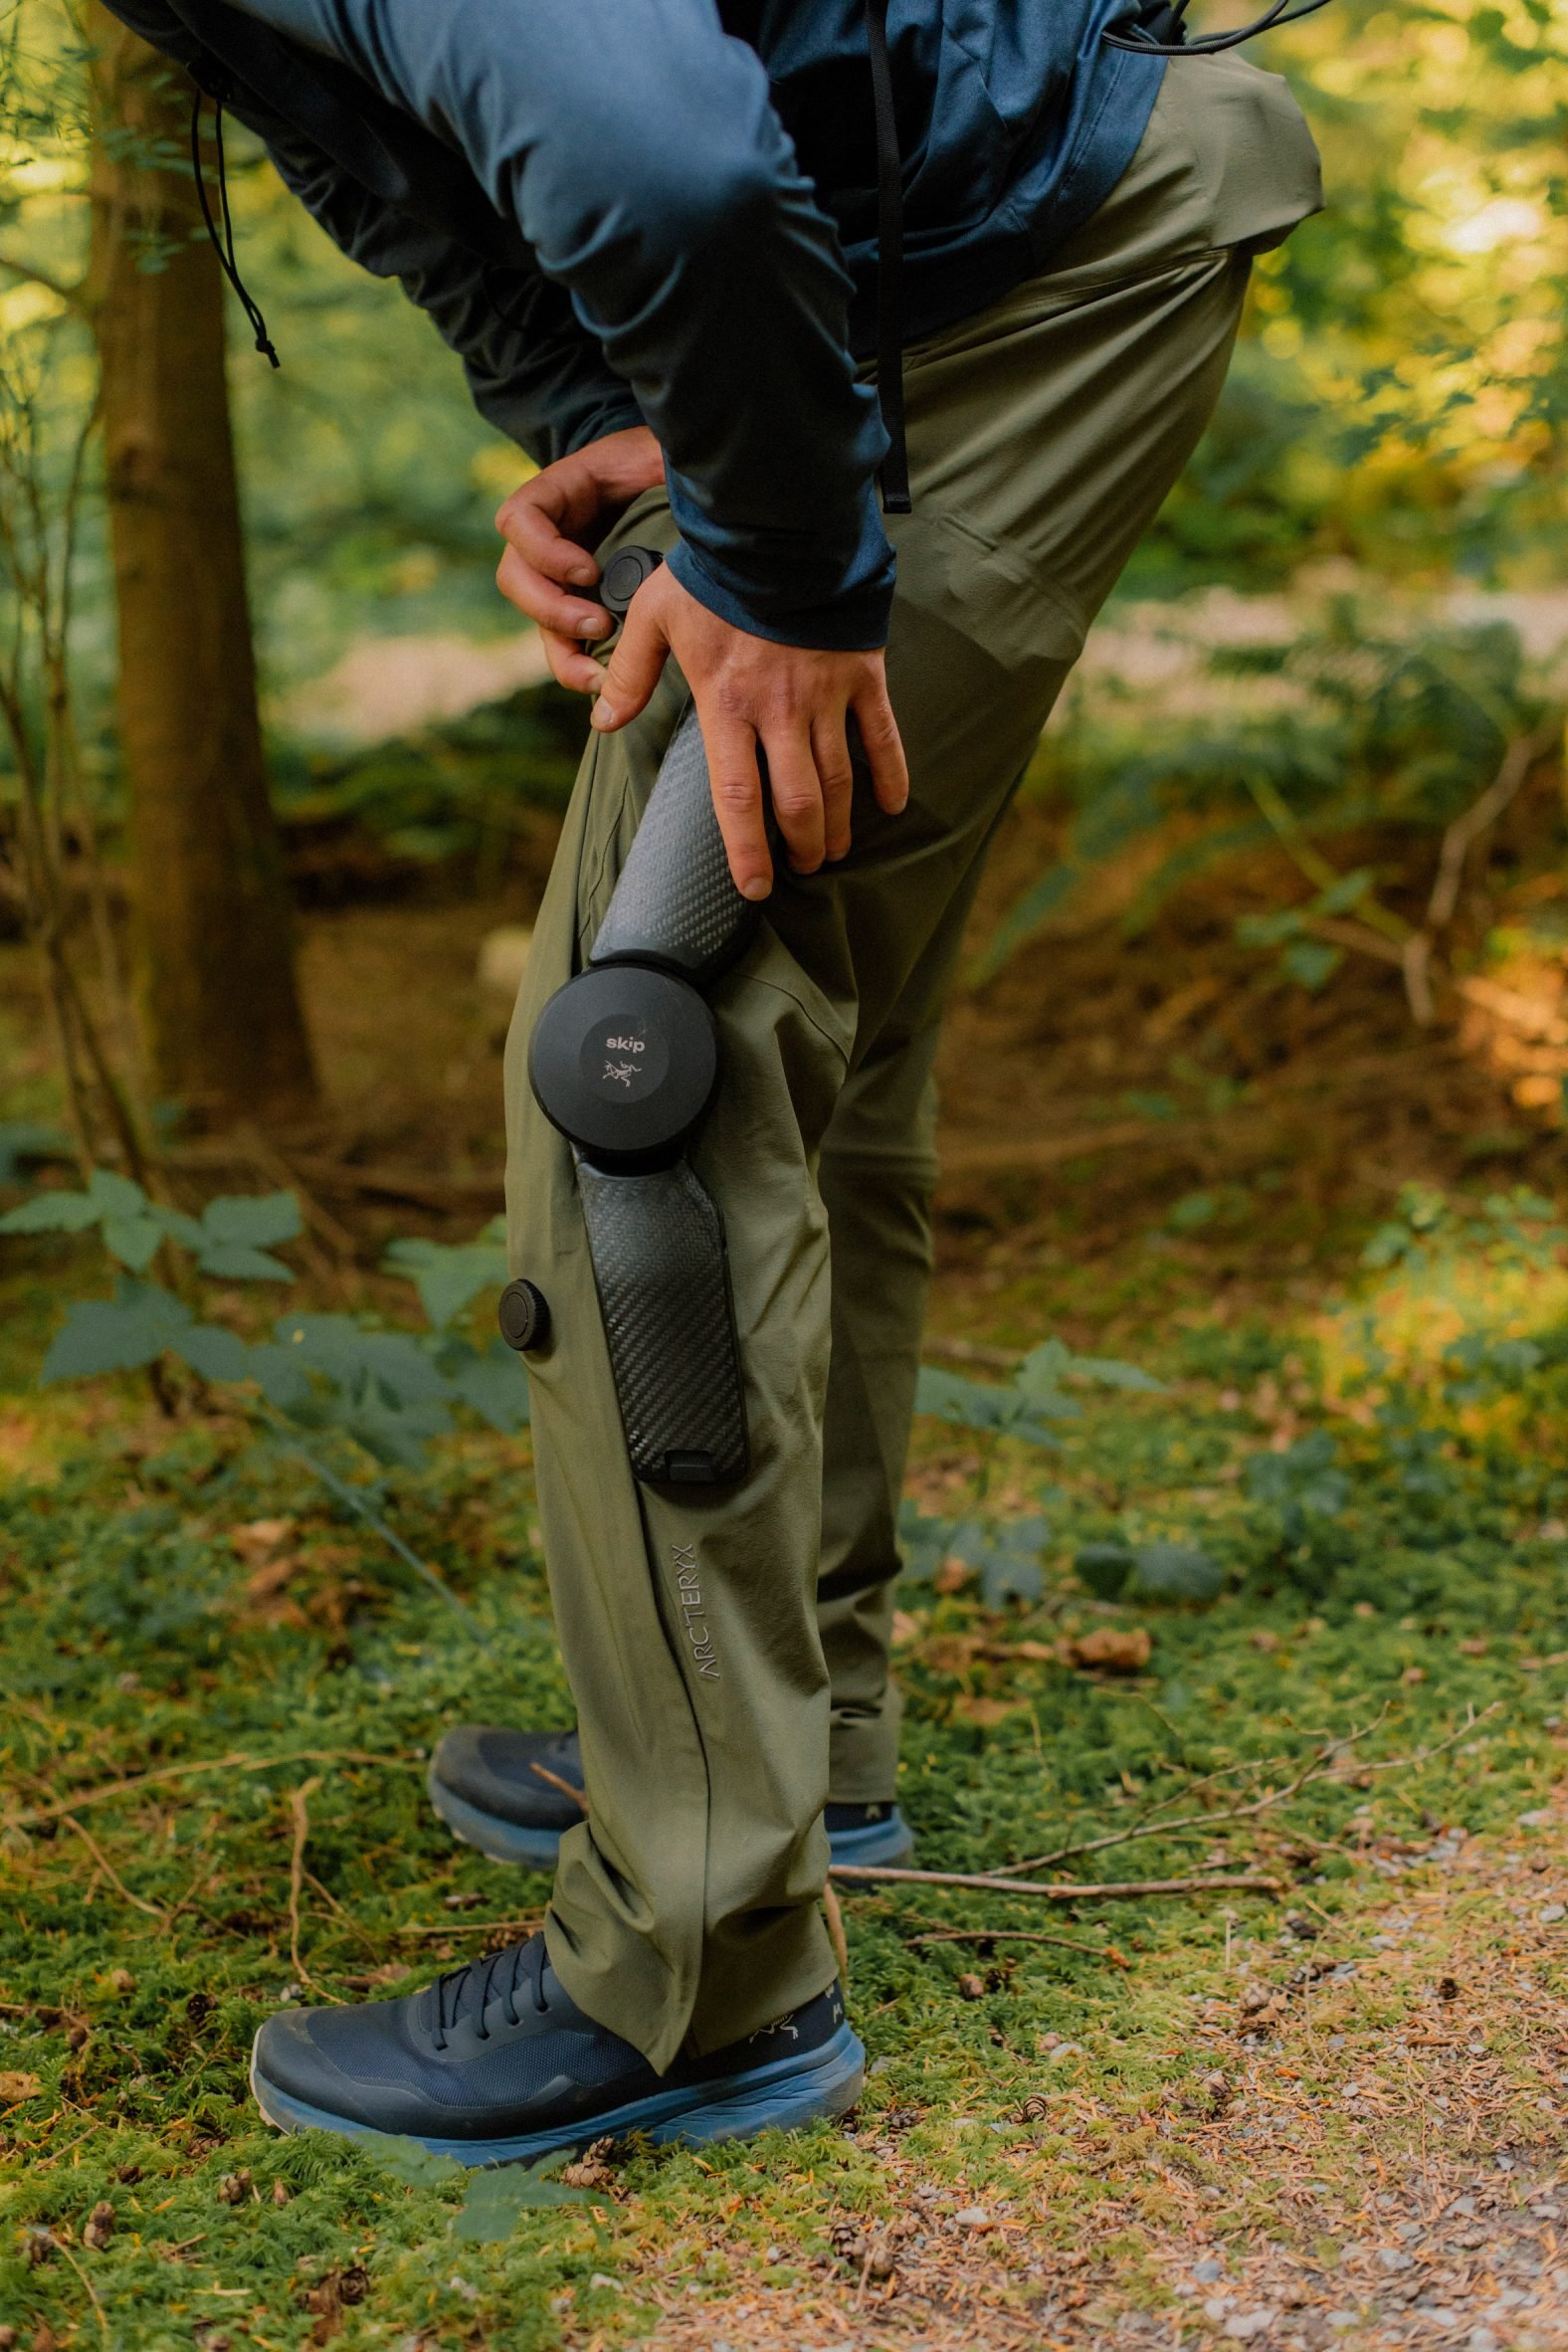 MO/GO powered hiking trousers by Arc'teryx and Skip